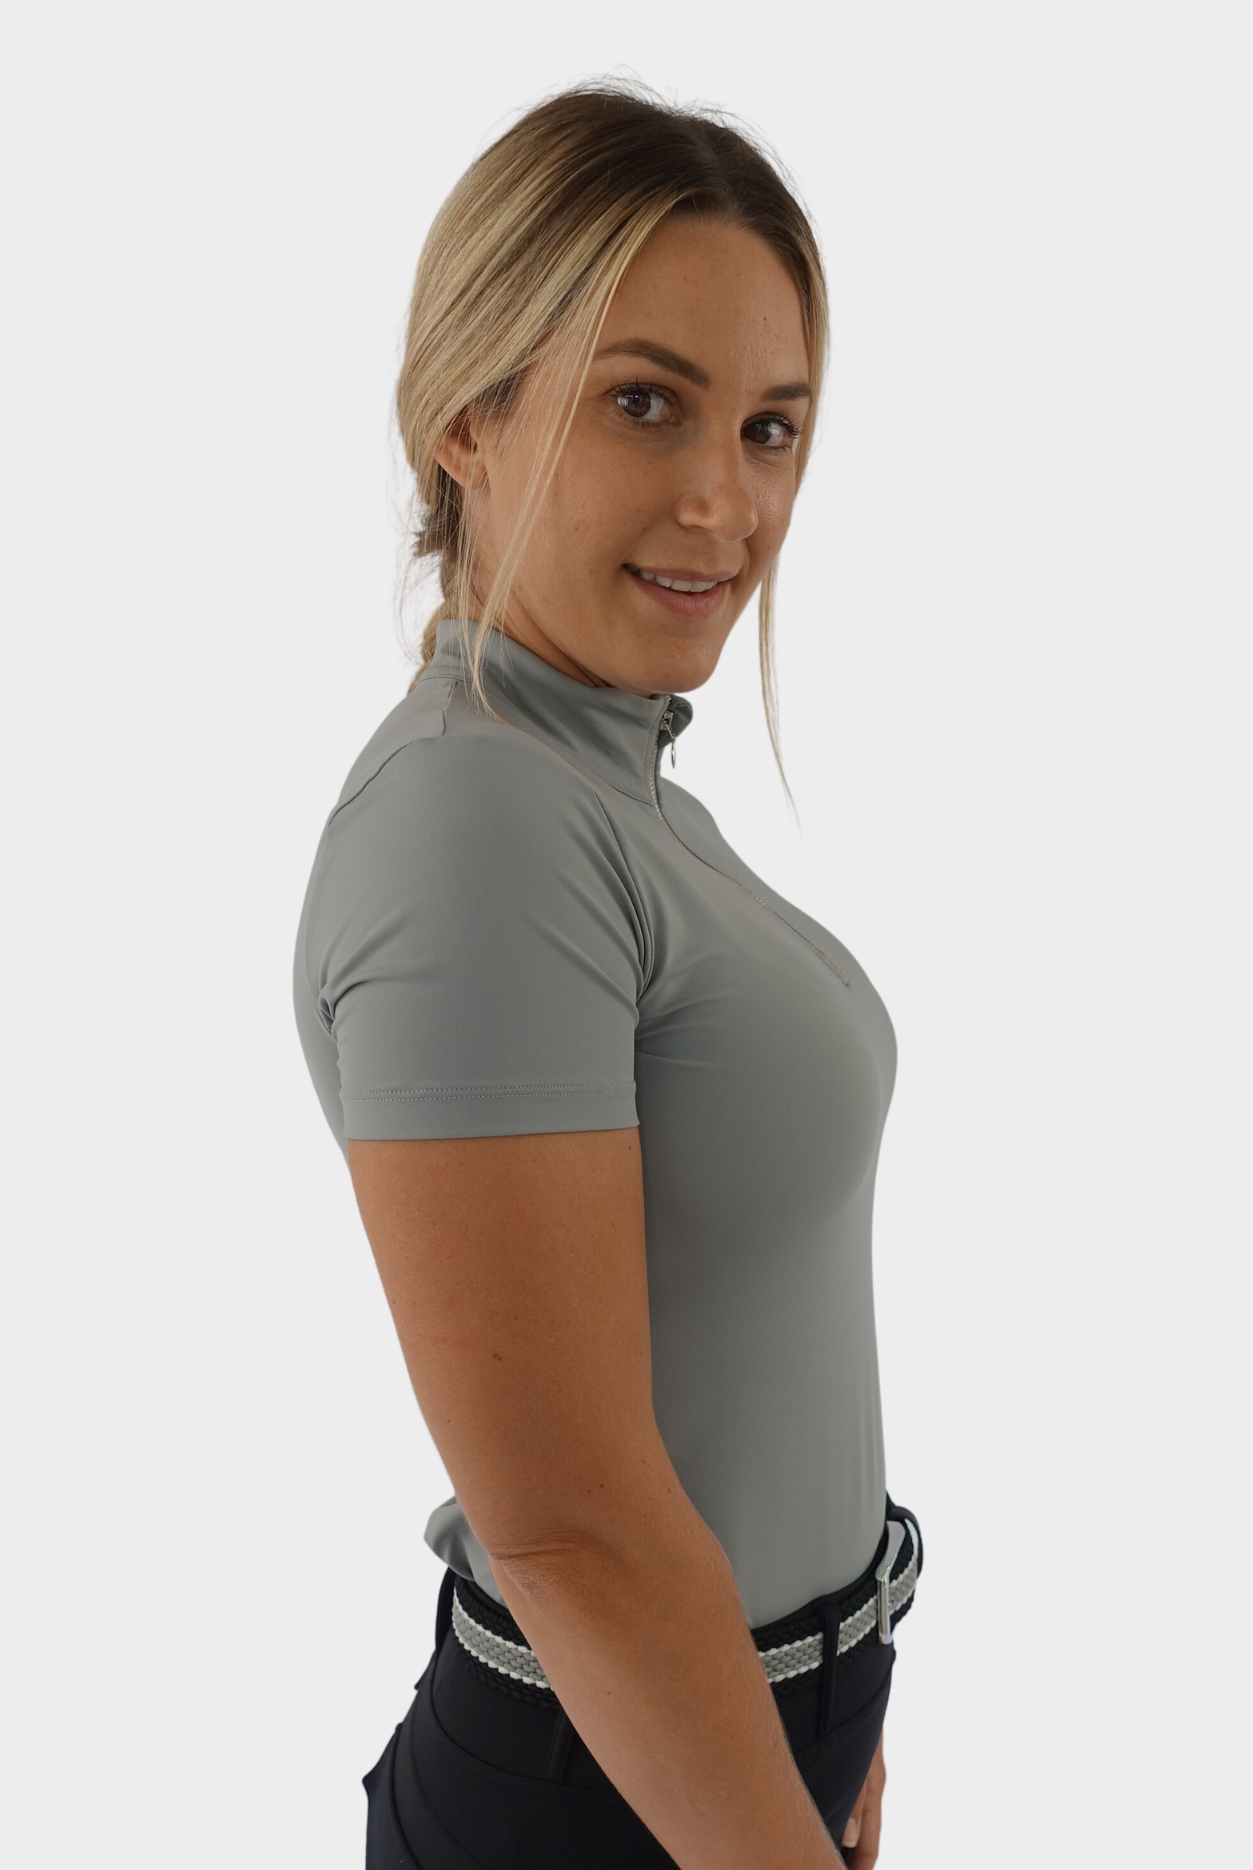 Fashionable and practical equestrian base layer for barn chores, featuring a comfortable fit and trendy design.